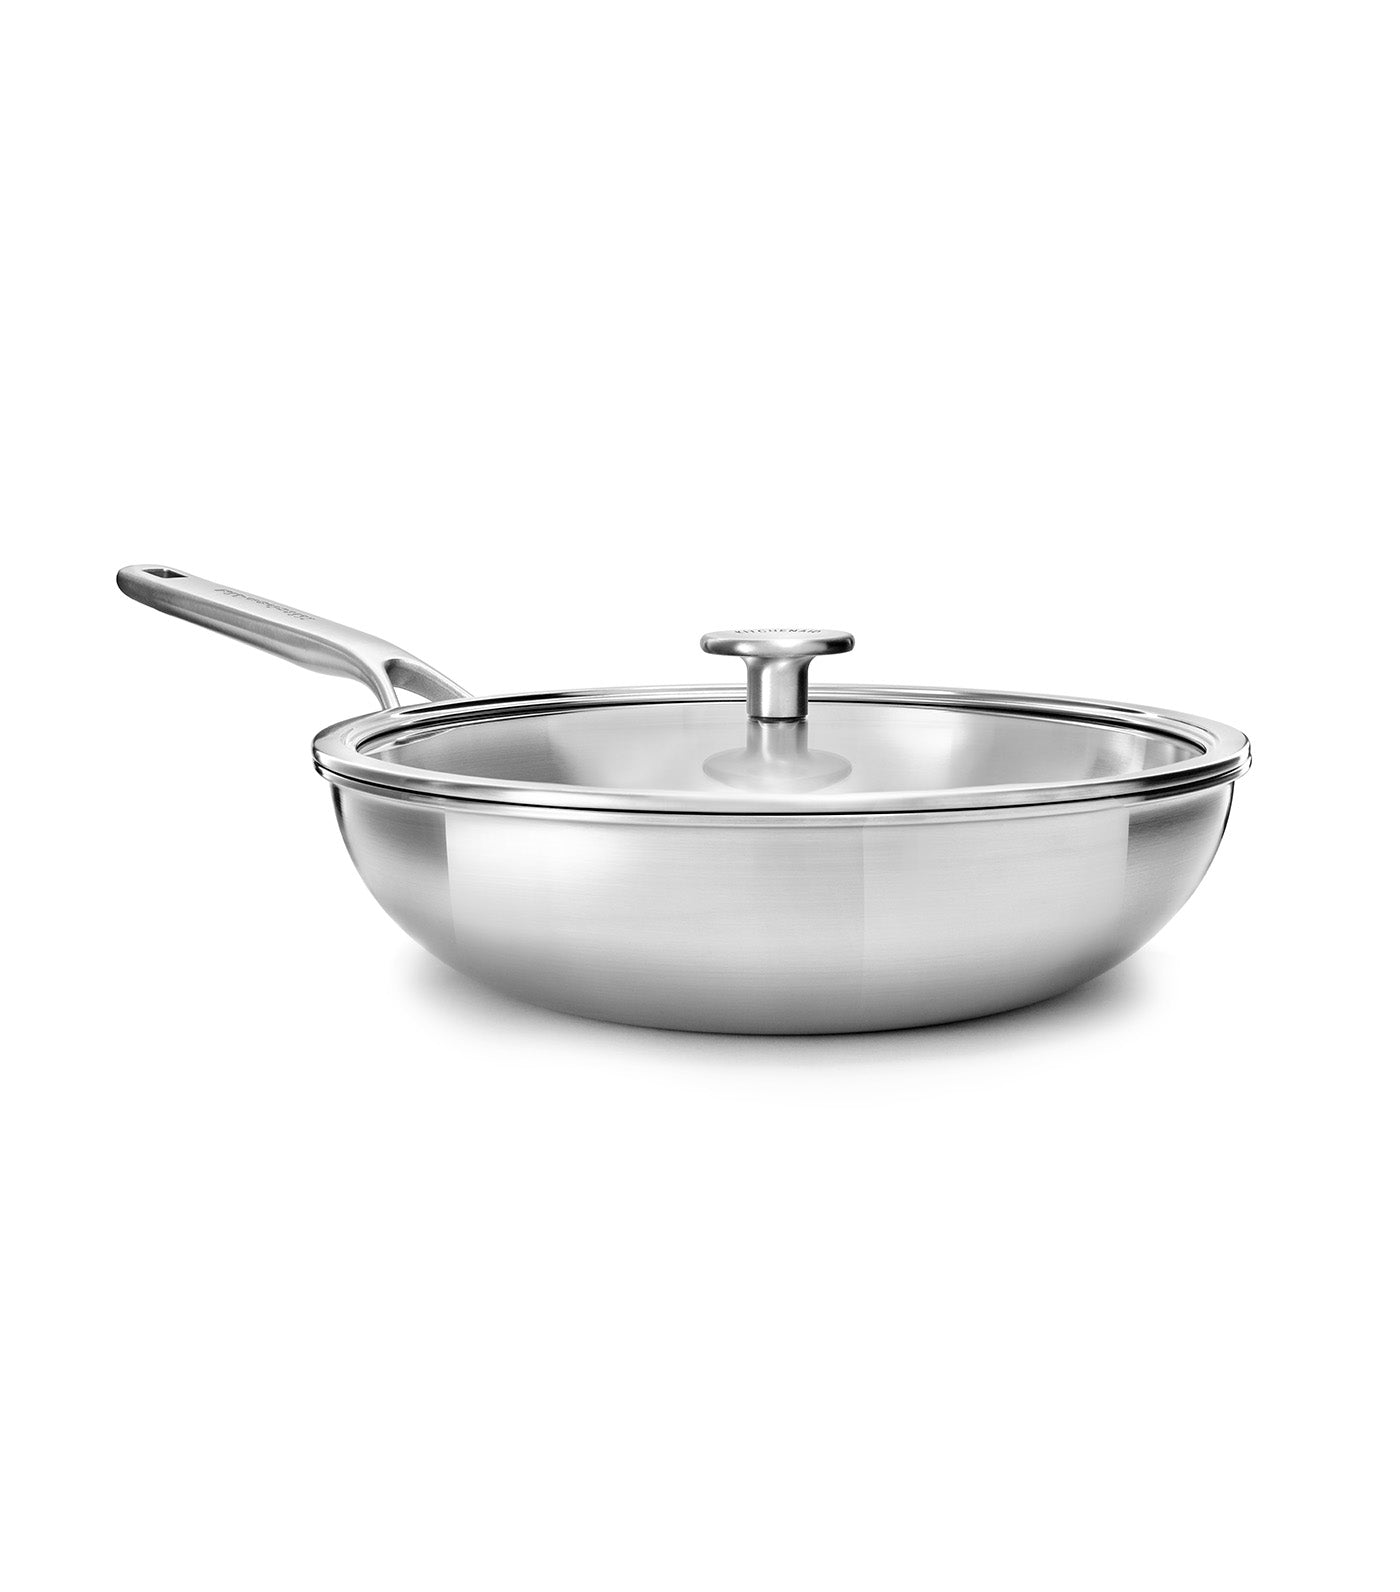 KitchenAid Multiply Tri-Ply Covered Wok Pan Uncoated - 28cm